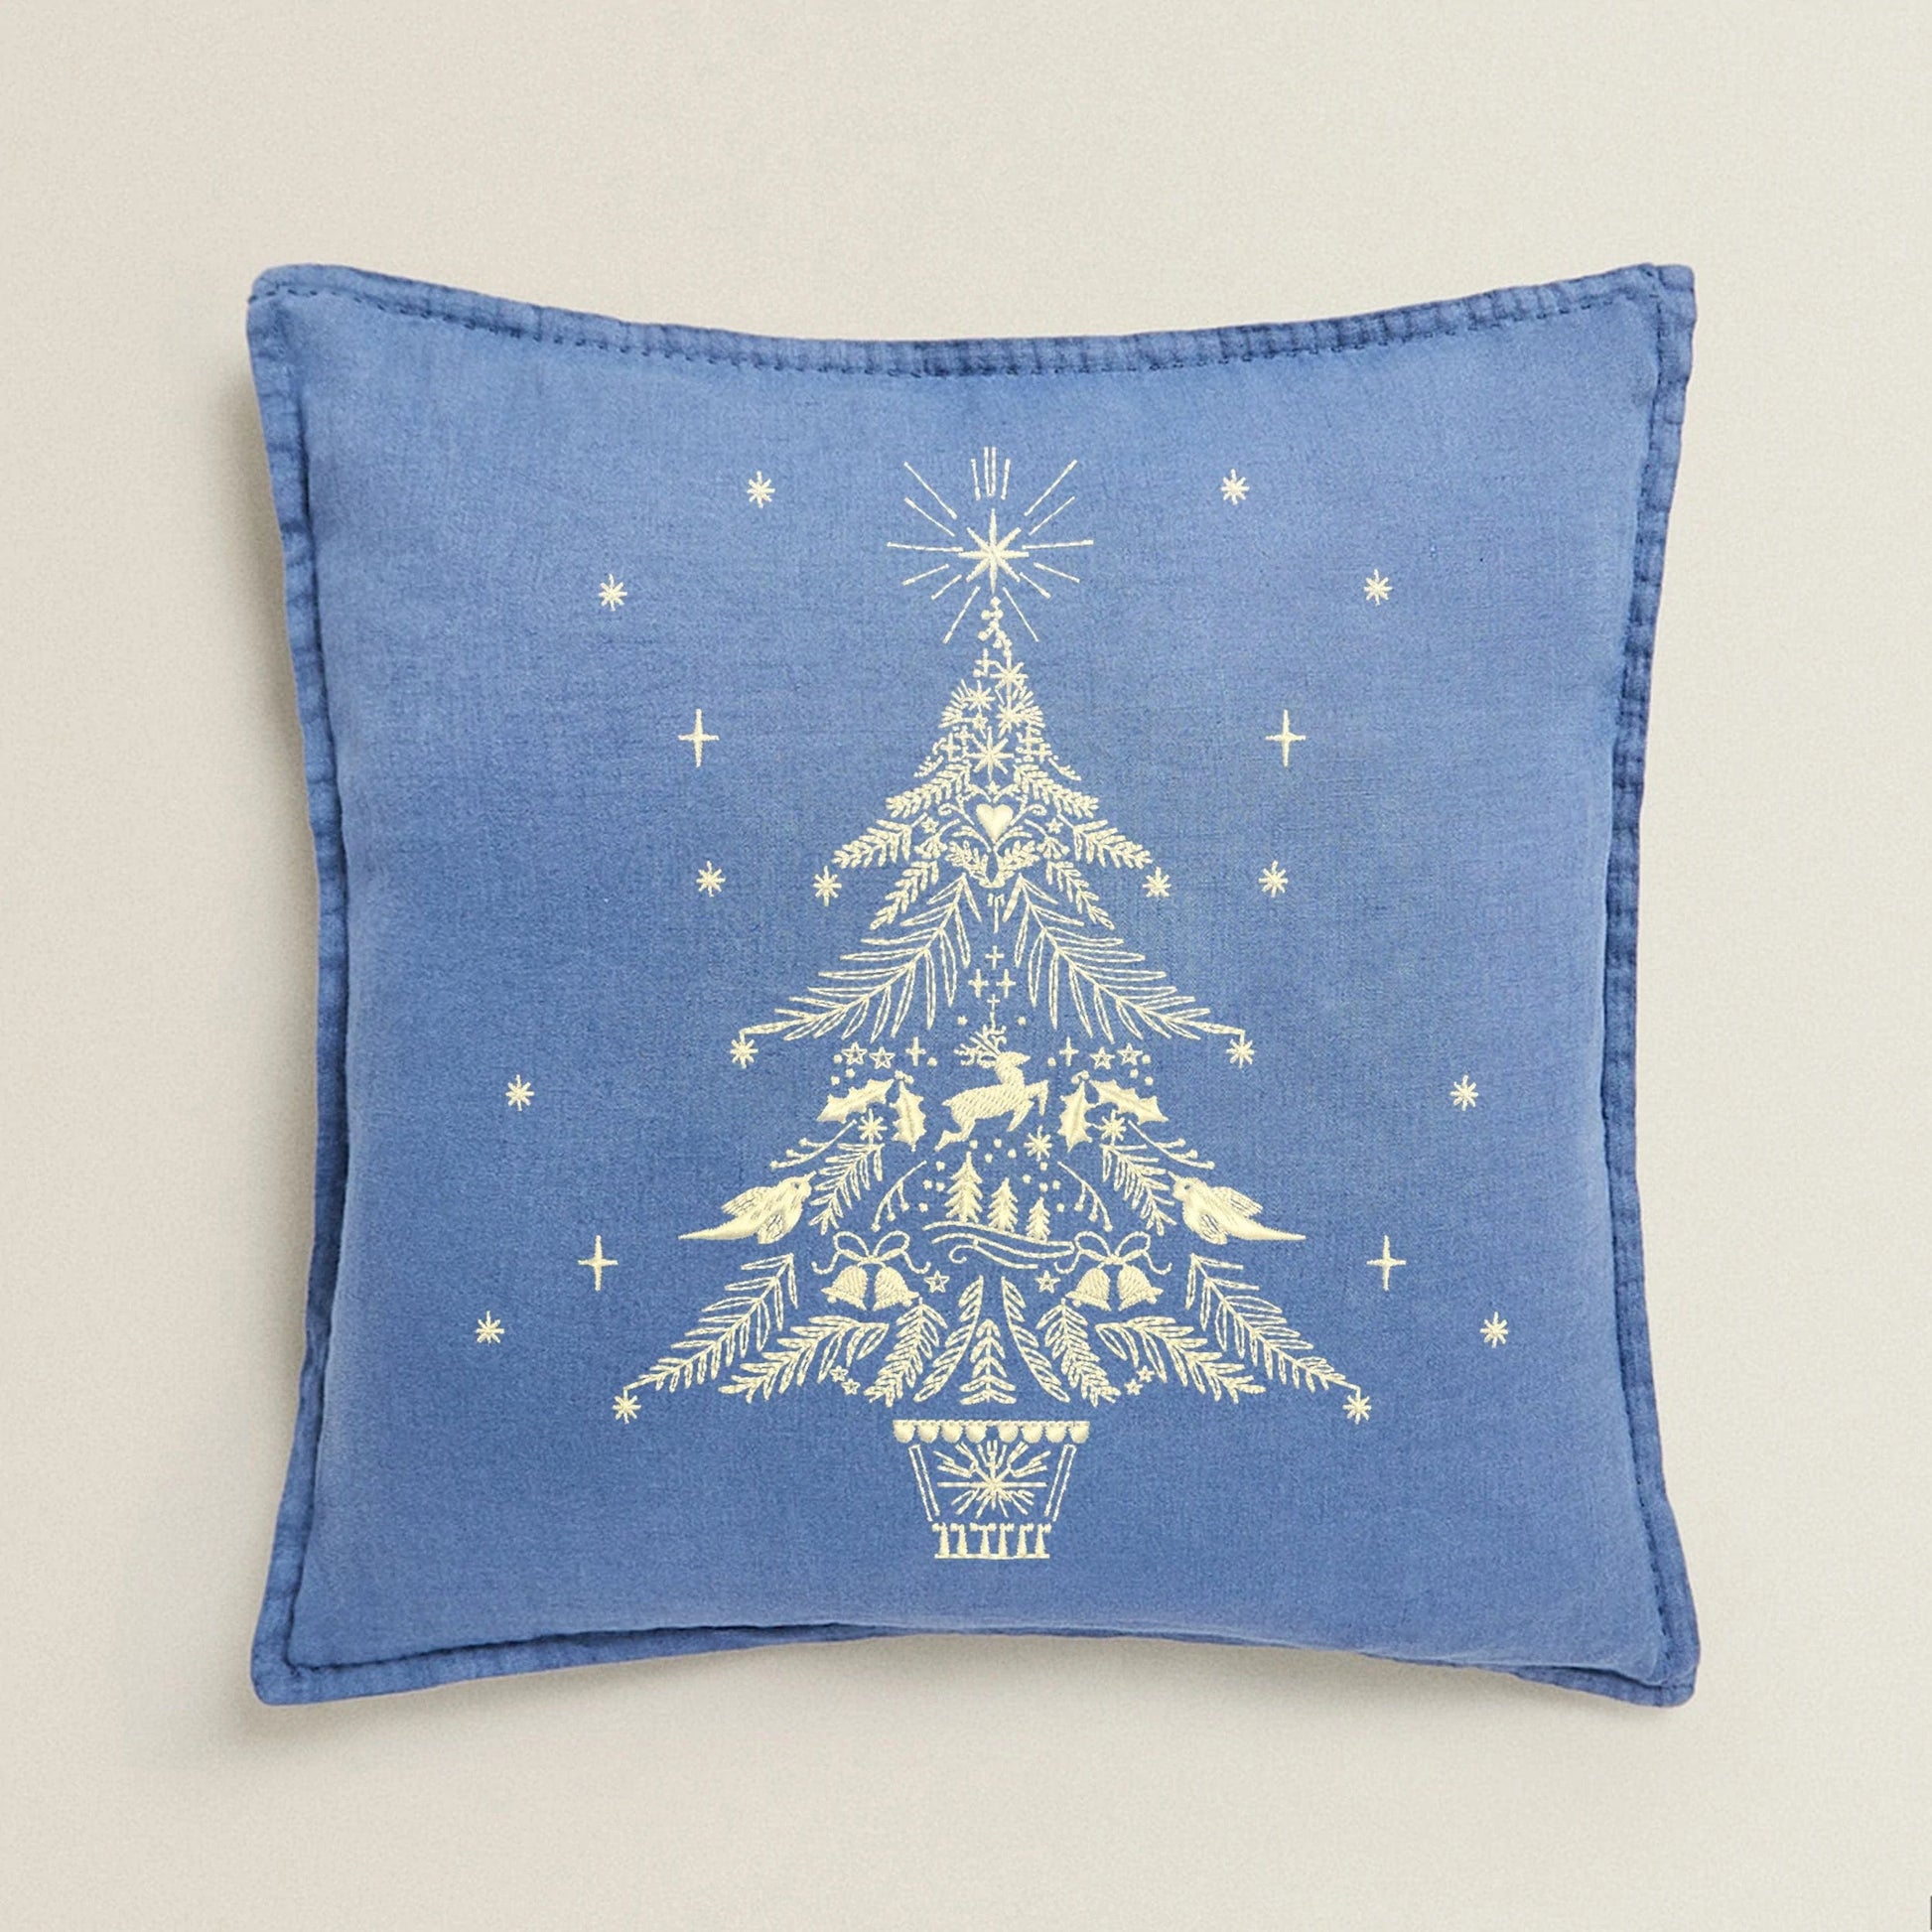 Magical Christmas Tree Machine Embroidery Design on pillow